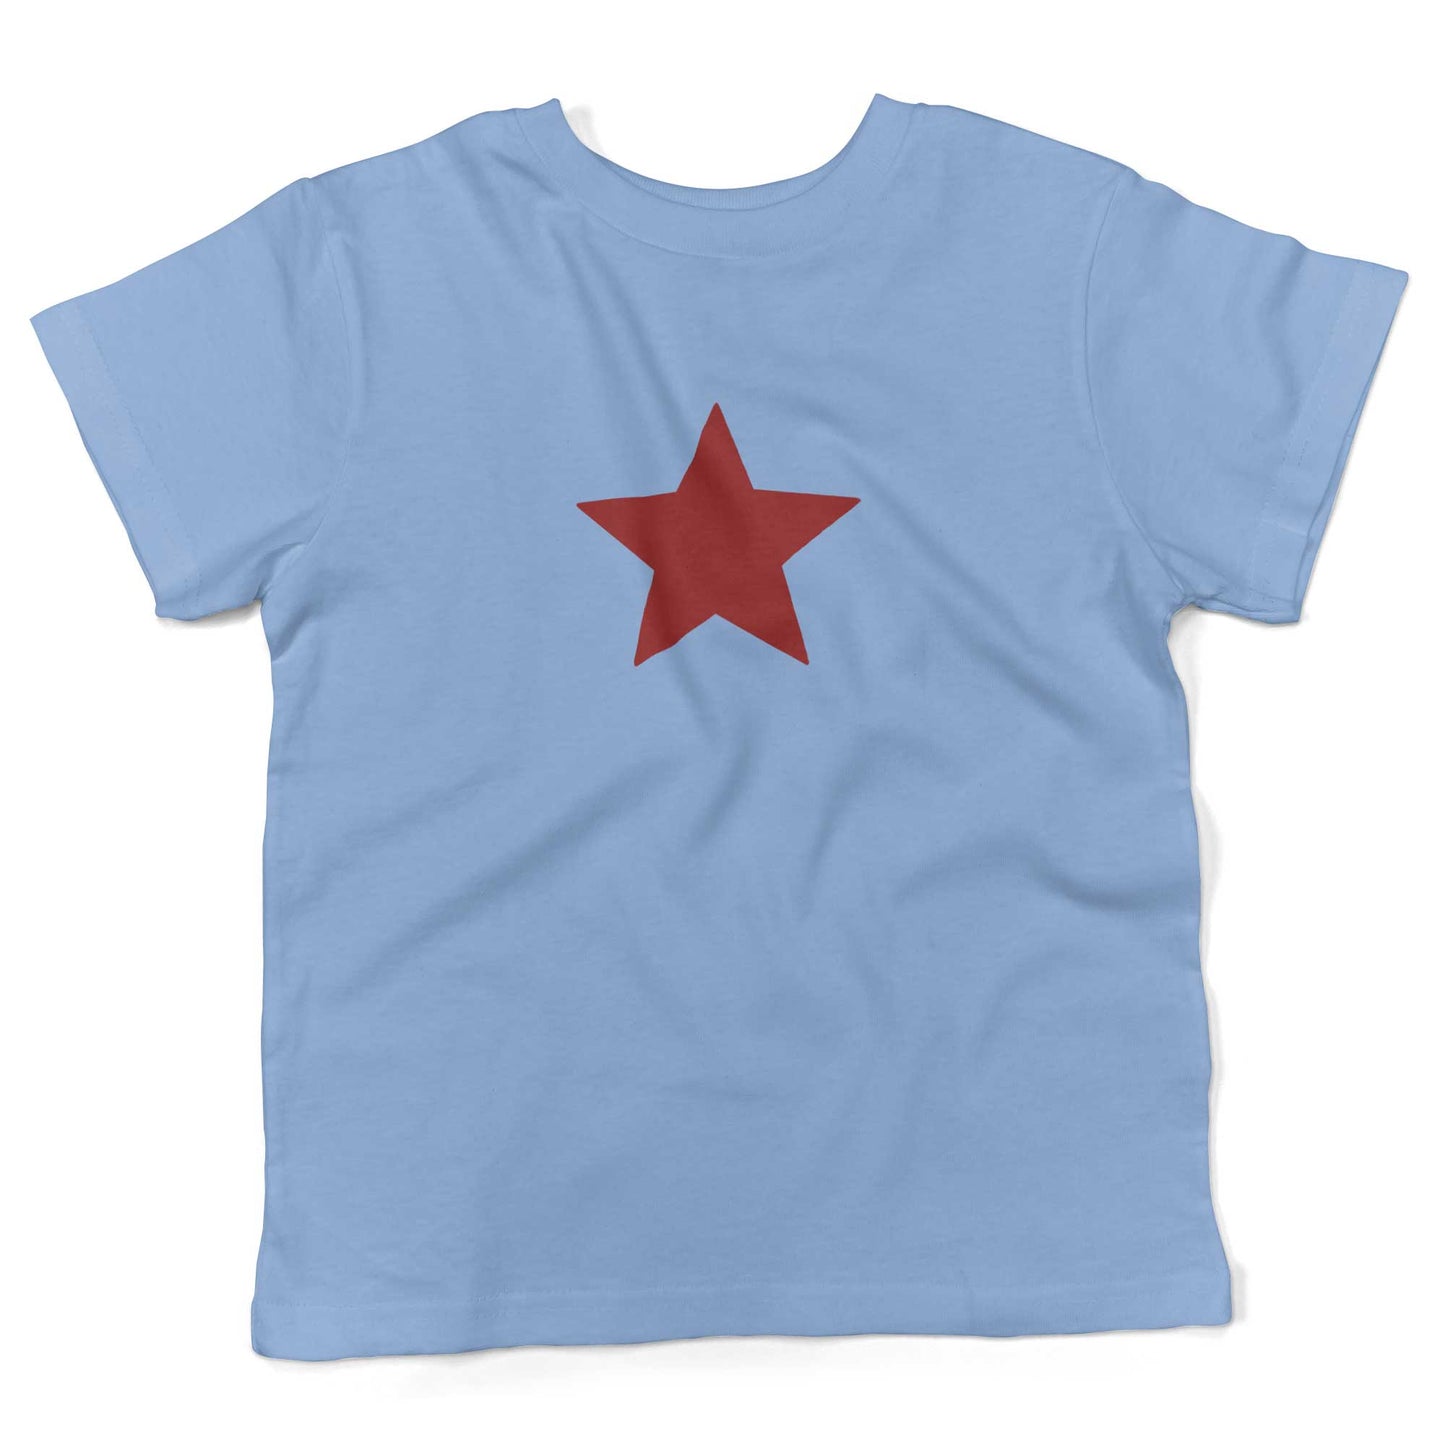 Five-Point Star Toddler Shirt-Organic Baby Blue-Red Star